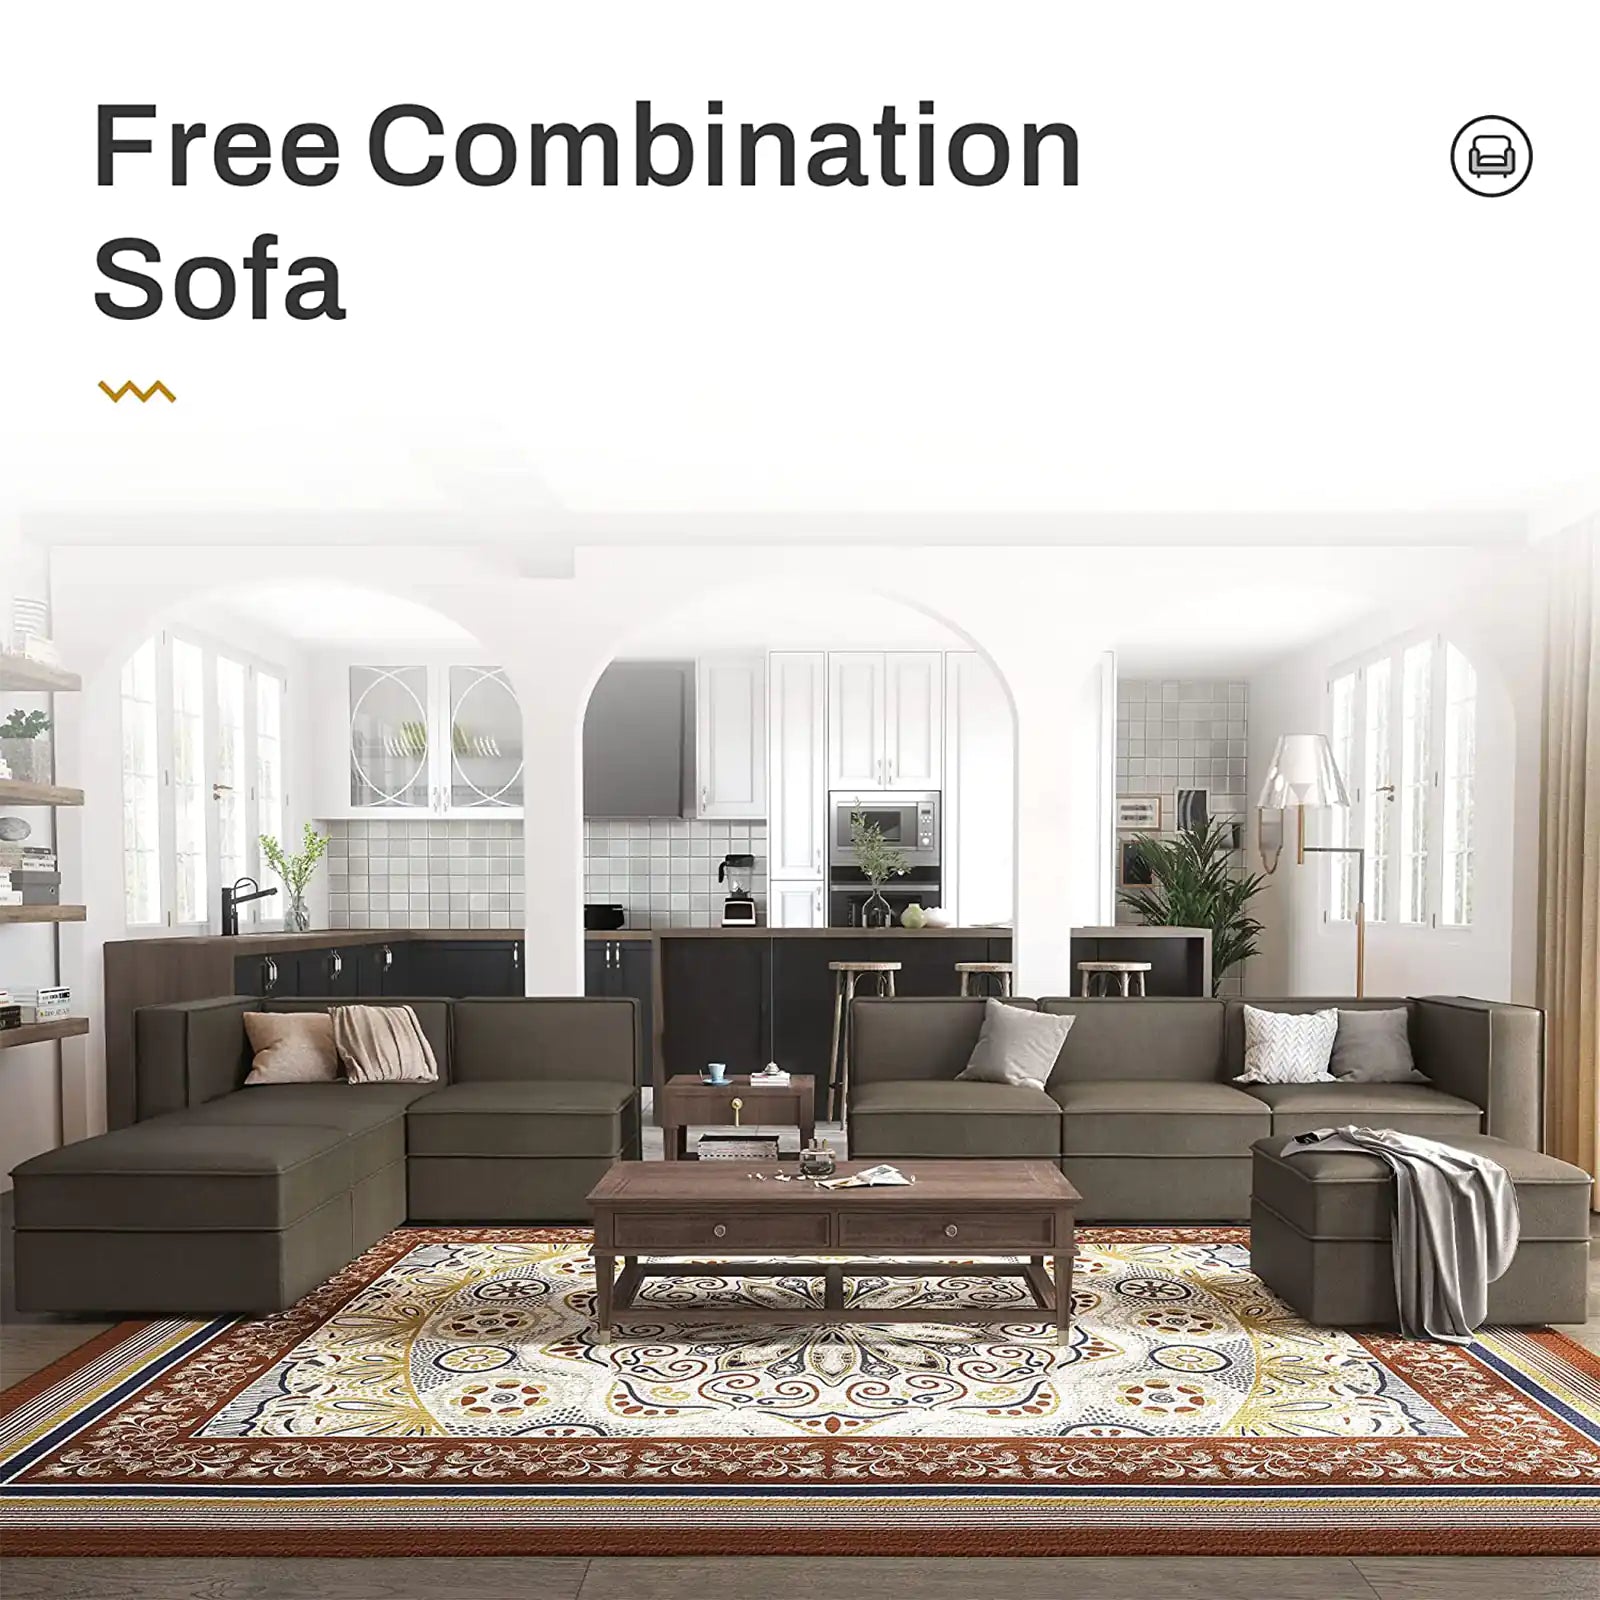 Modular and Convertible Sectional Sofa with Storage Seats